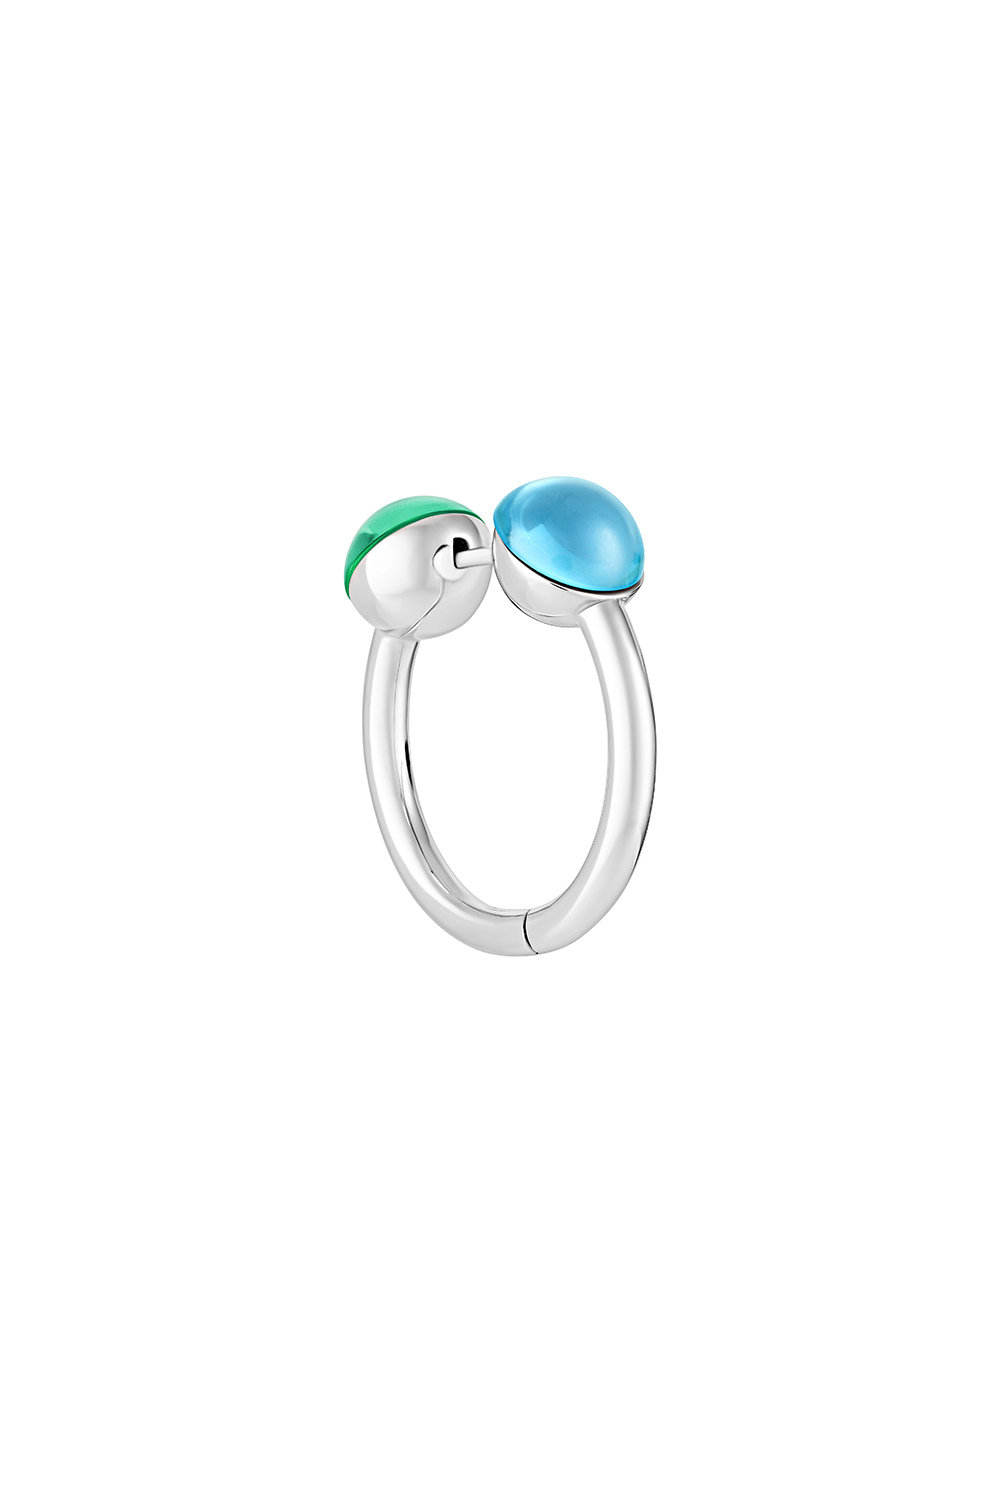 TWO-SIDED HOOP EARRING BLUE AND GREEN